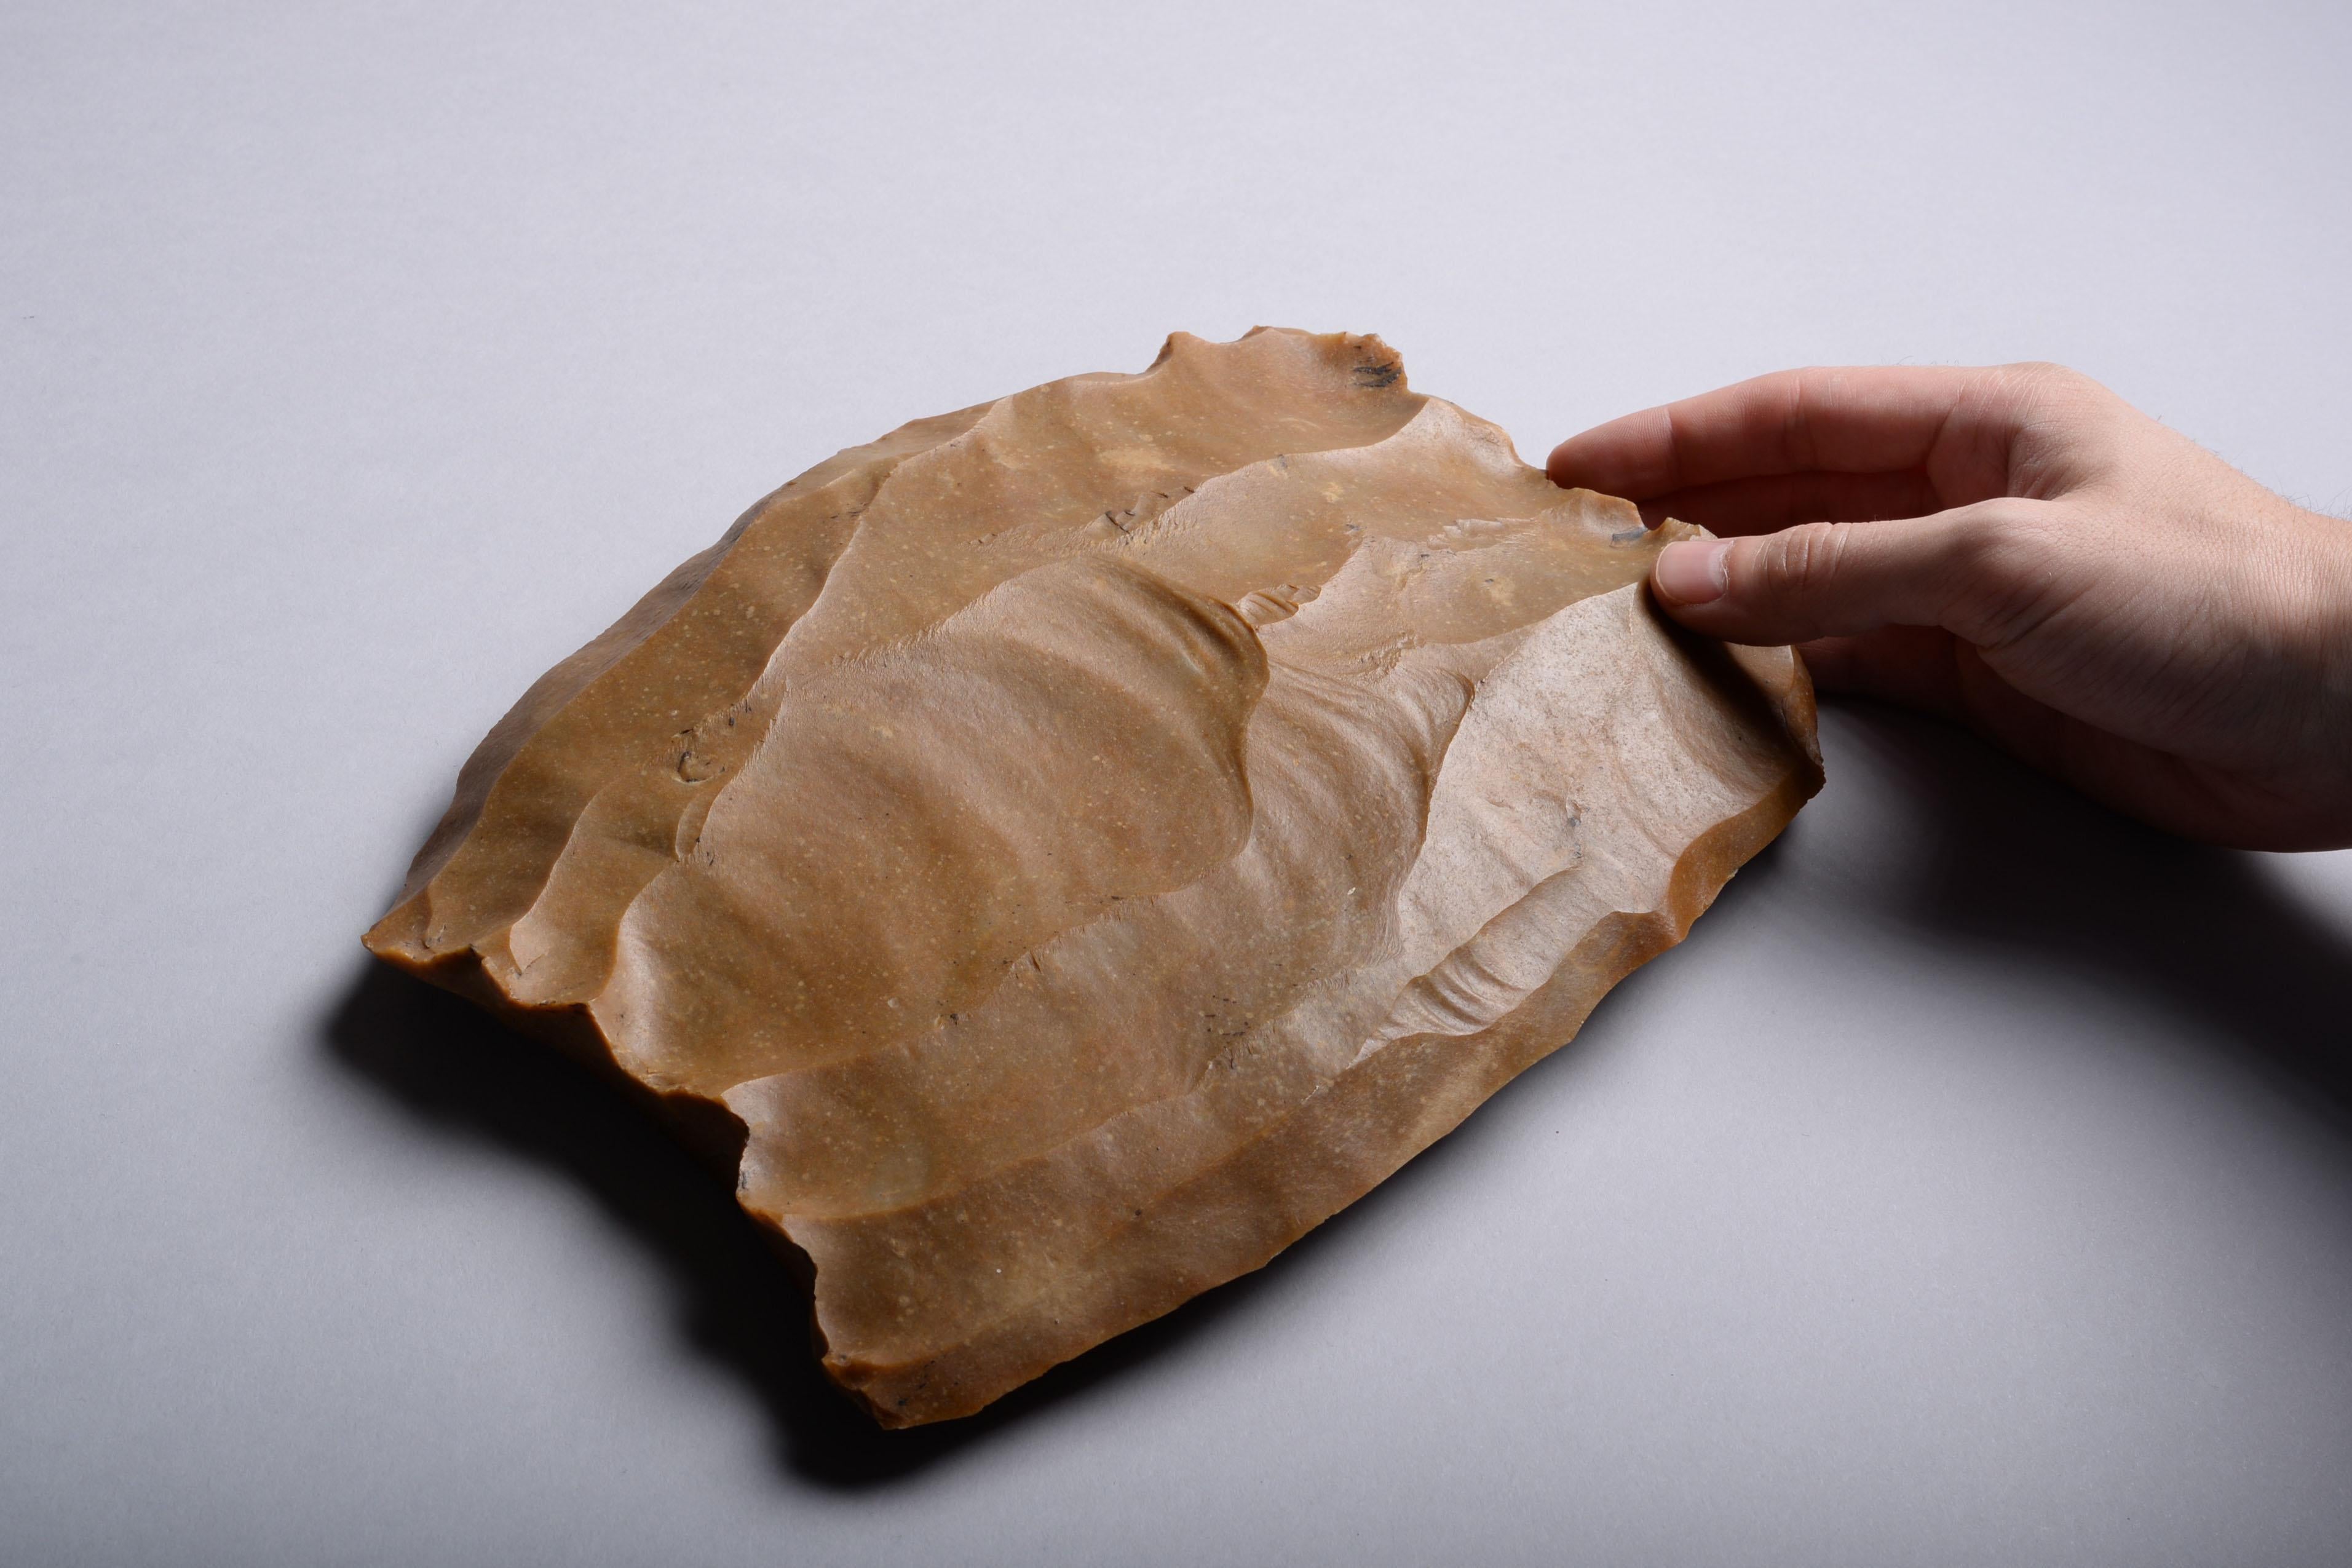 A large Neolithic flint core from the Loire Valley, France, dating to 8500-4500 BC.

A substantial block of caramel colored flint, the surface covered with ripples left from individual strikes; each creating a distinct flint blade or